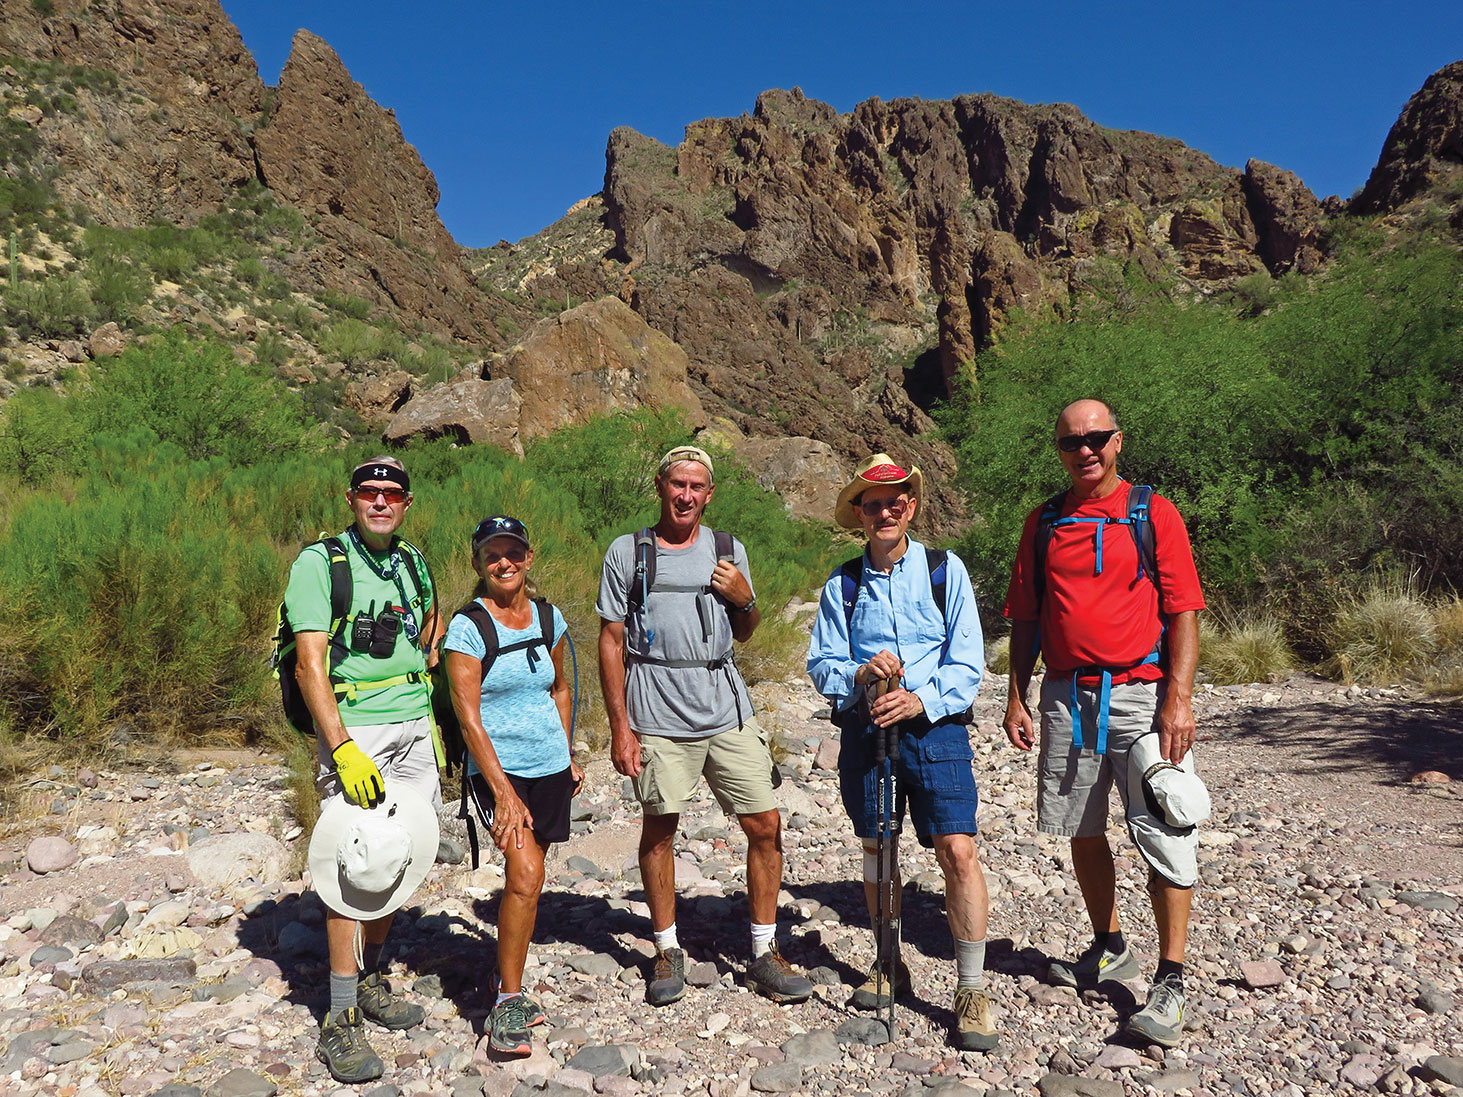 Left to right: Lynn Warren (photographer), Marilyn Reynolds, Clare Bangs, Pete Williams and Wayne Wills deep in a scenic canyon in the Goldfields, not far from Saguaro Lake.